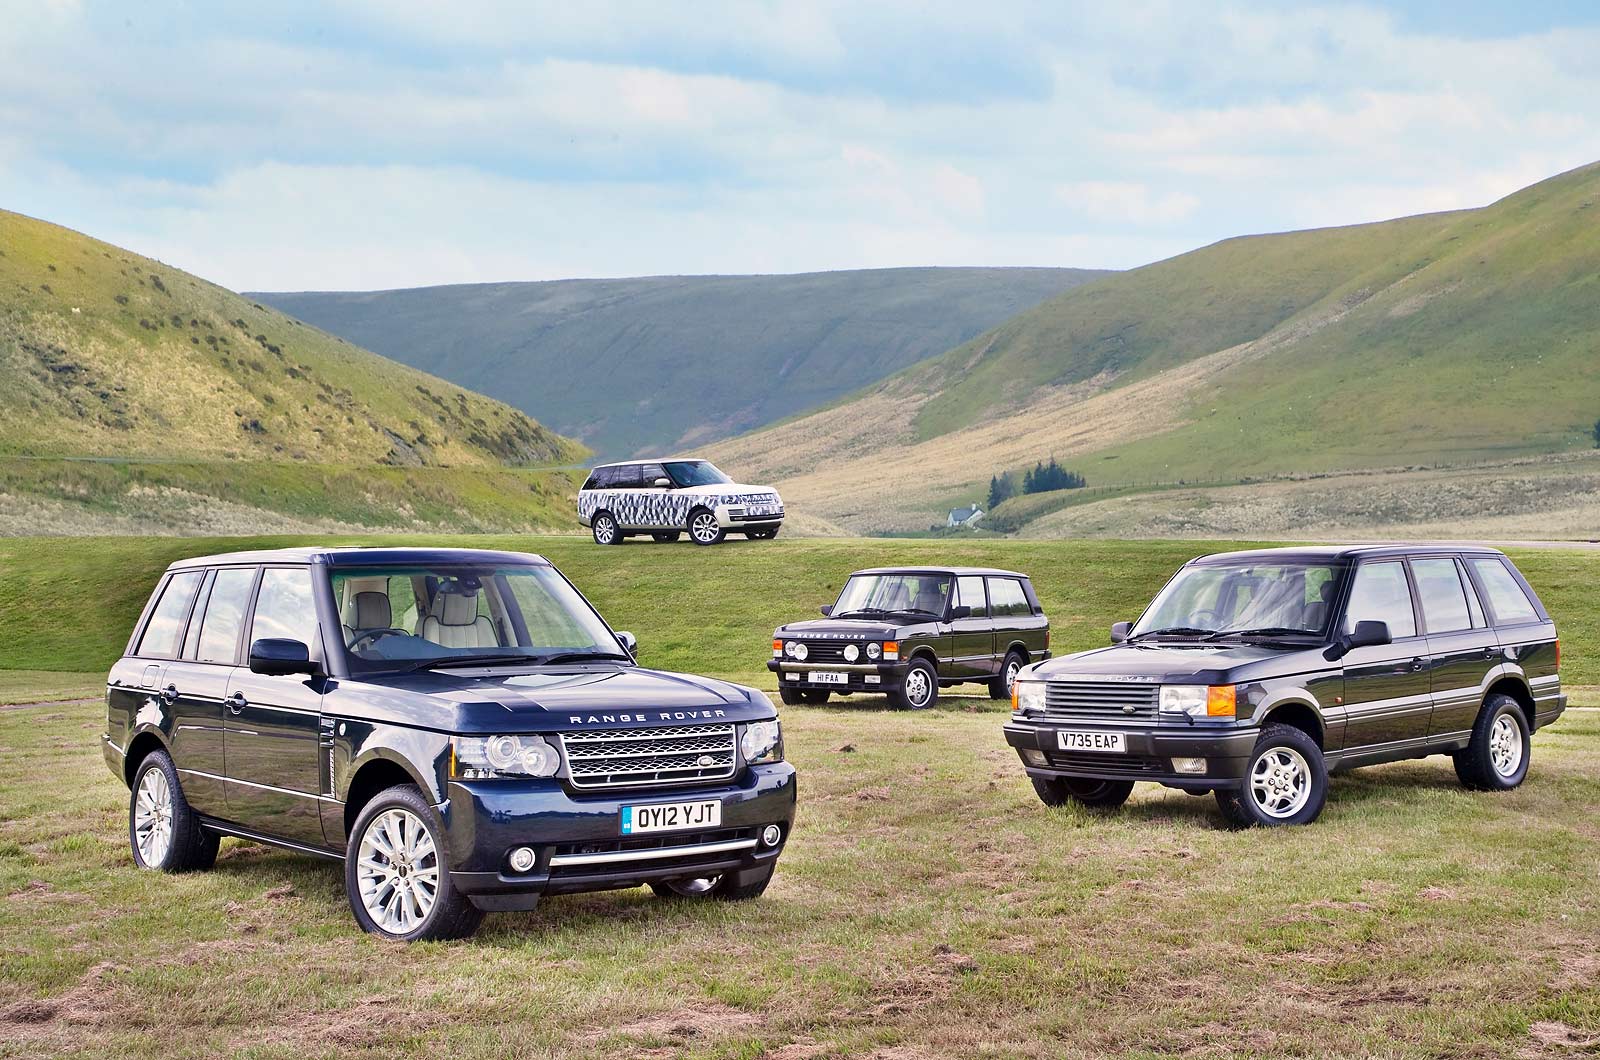 The history of Range Rover